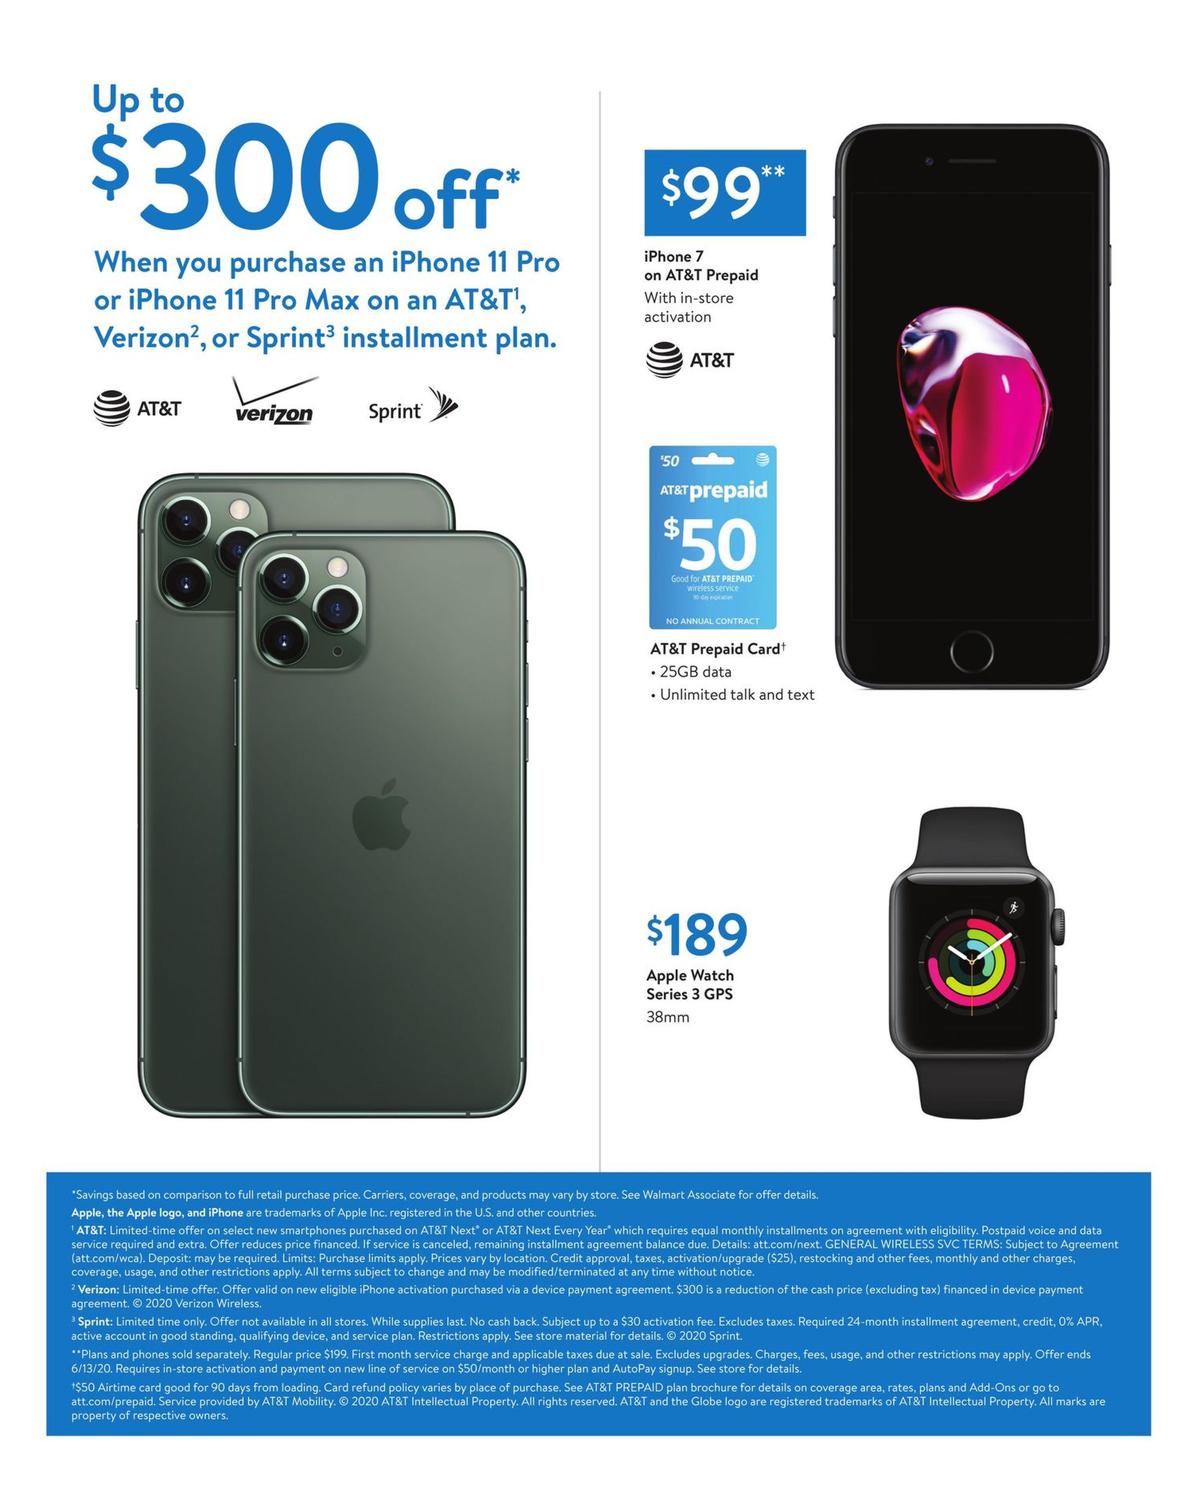 Walmart Weekly Ad from March 15